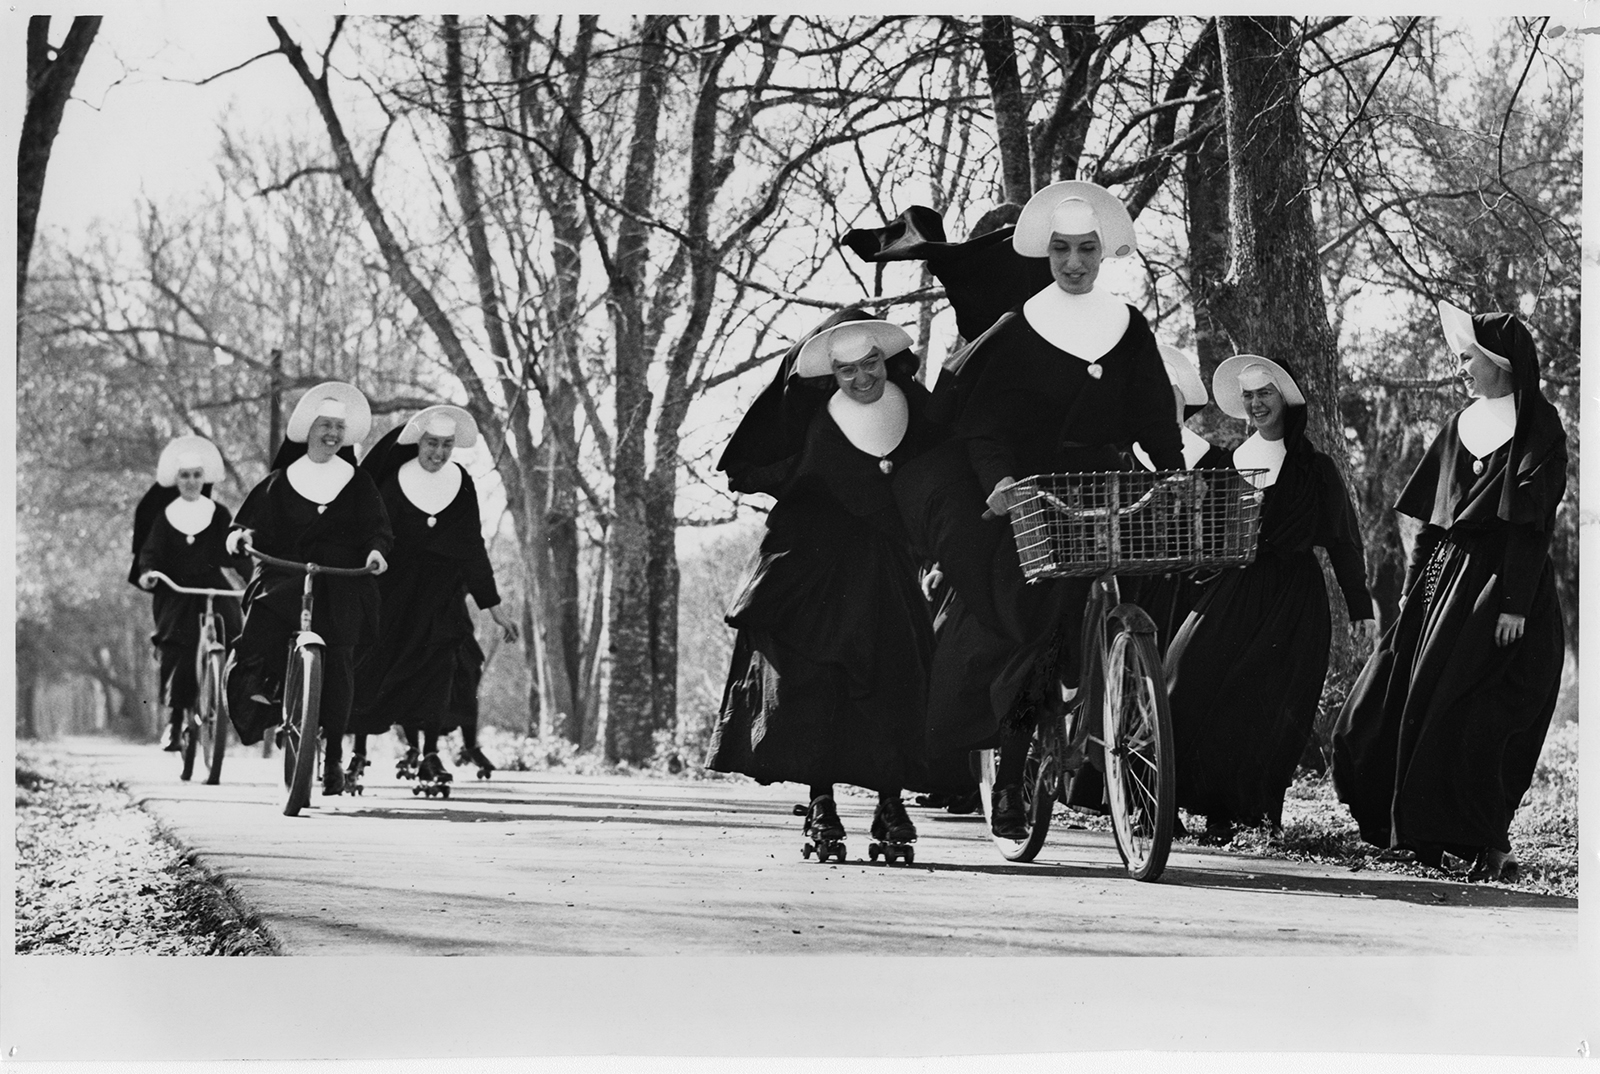 Juniorate members of the Marianites of the Holy Cross turn to bicycling and roller-skating for recreation during a break from spiritual and academic training in New Orleands in 1965. RNS archive photo by Frank Methe. Photo courtesy of Presbyterian Historical Society